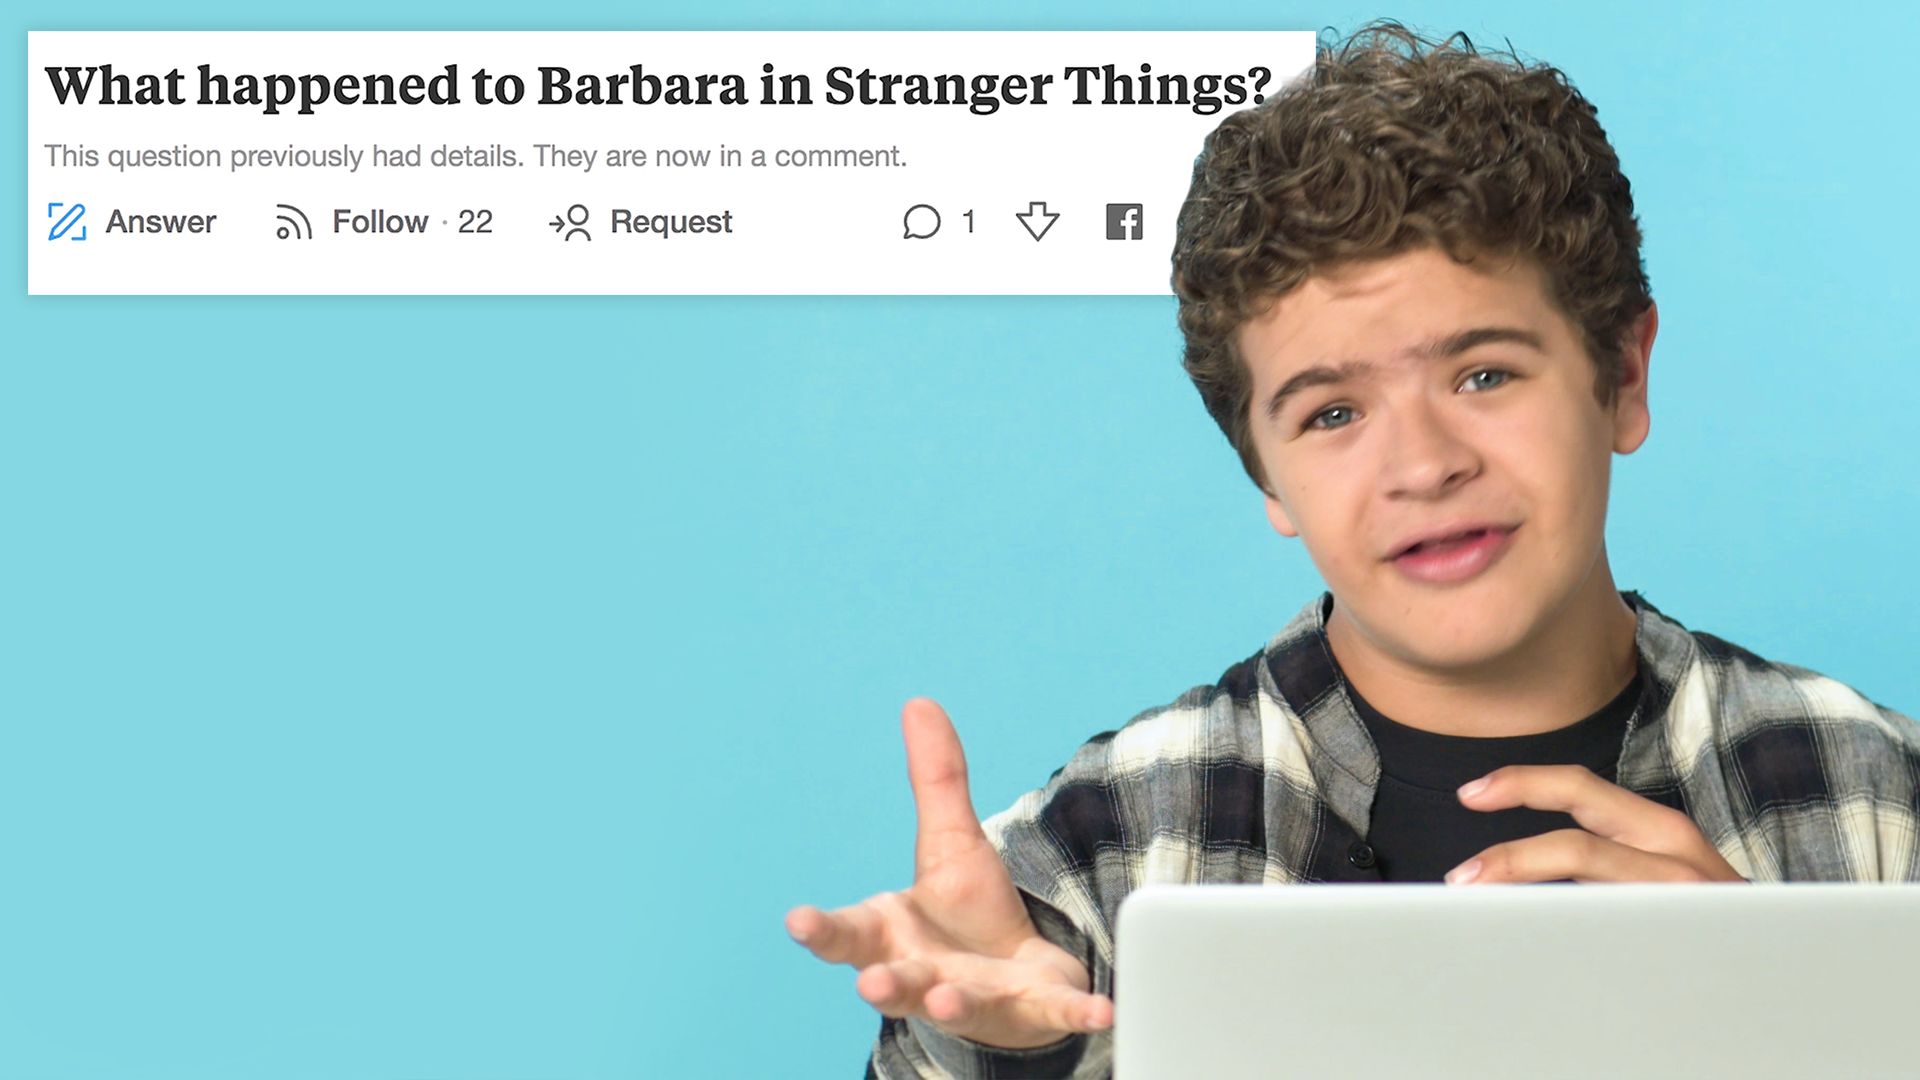 Watch Stranger Things Gaten Matarazzo Goes Undercover on Reddit, YouTube and Twitter Actually Me GQ